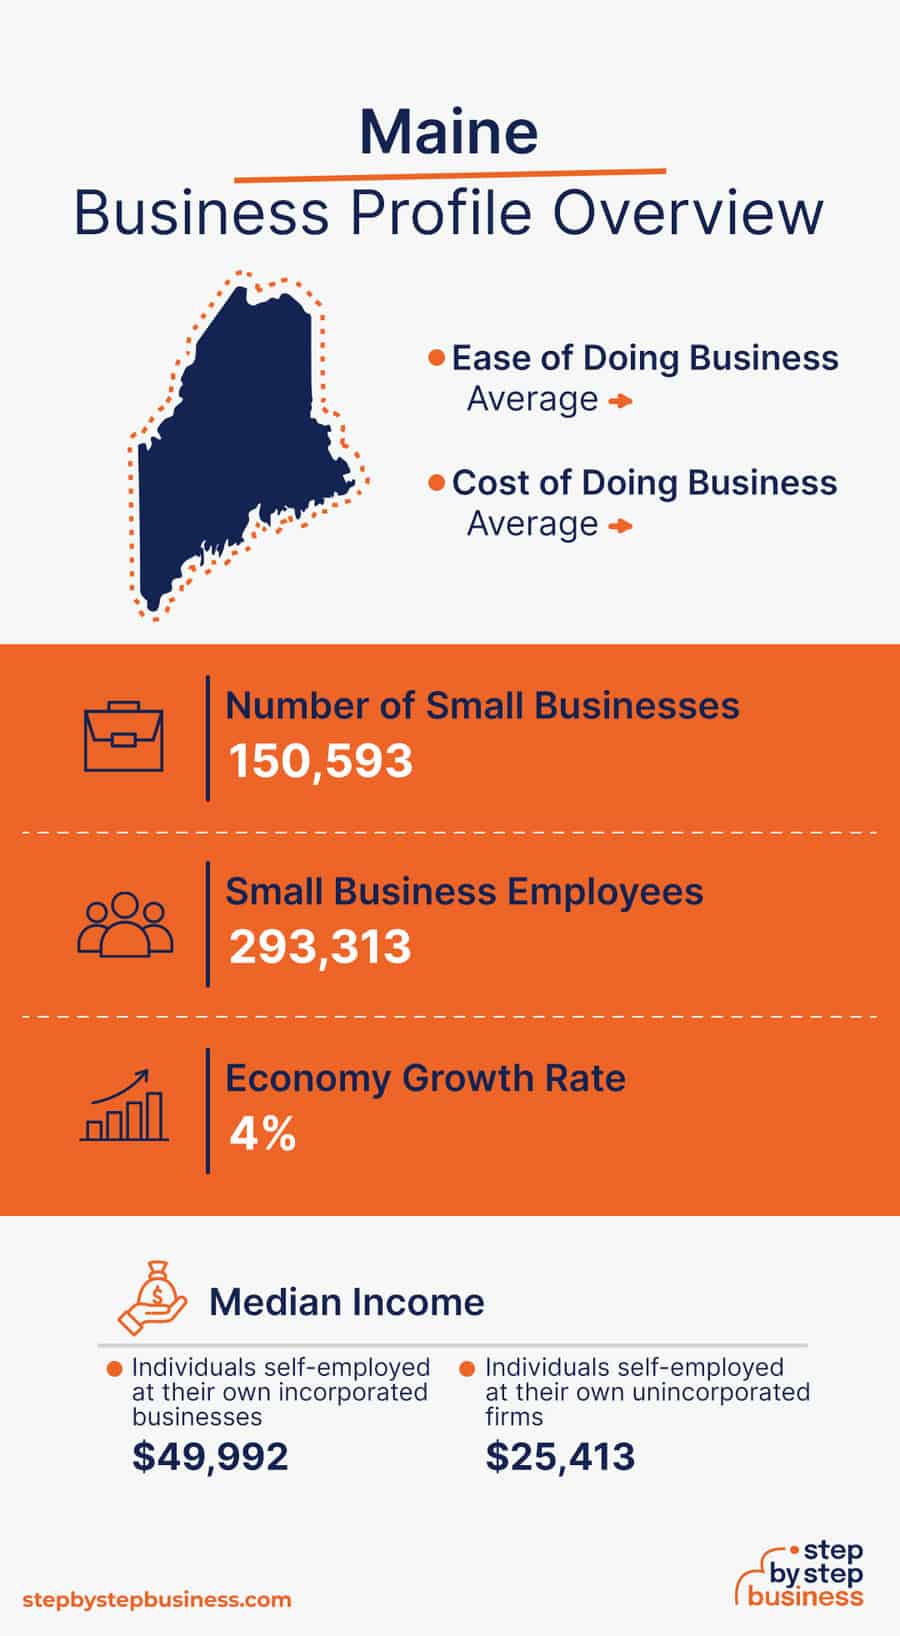 Maine Business Profile Overview